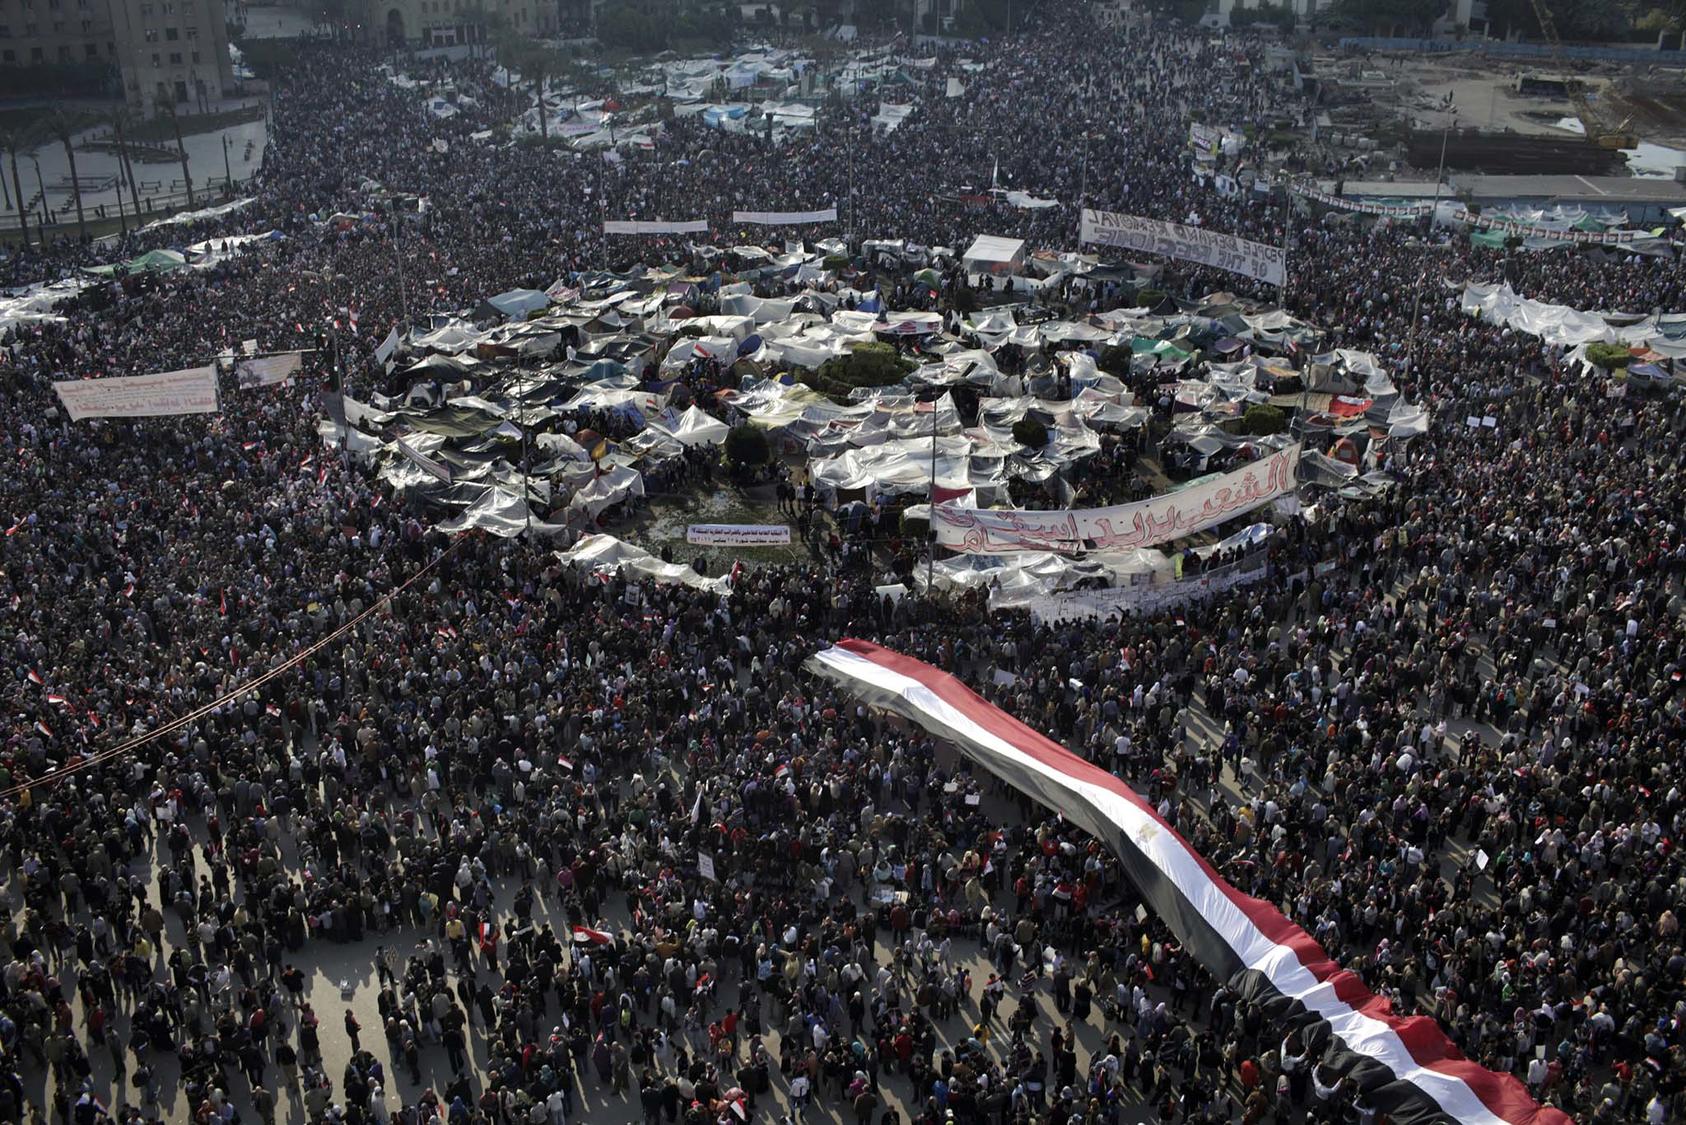 Thousands of Egyptian anti-government protesters gather in Tahrir Square to demonstrate against the regime of longtime dictator Hosni Mubarak in Cairo. Feb. 8, 2011. (Ed Ou/The New York Times)